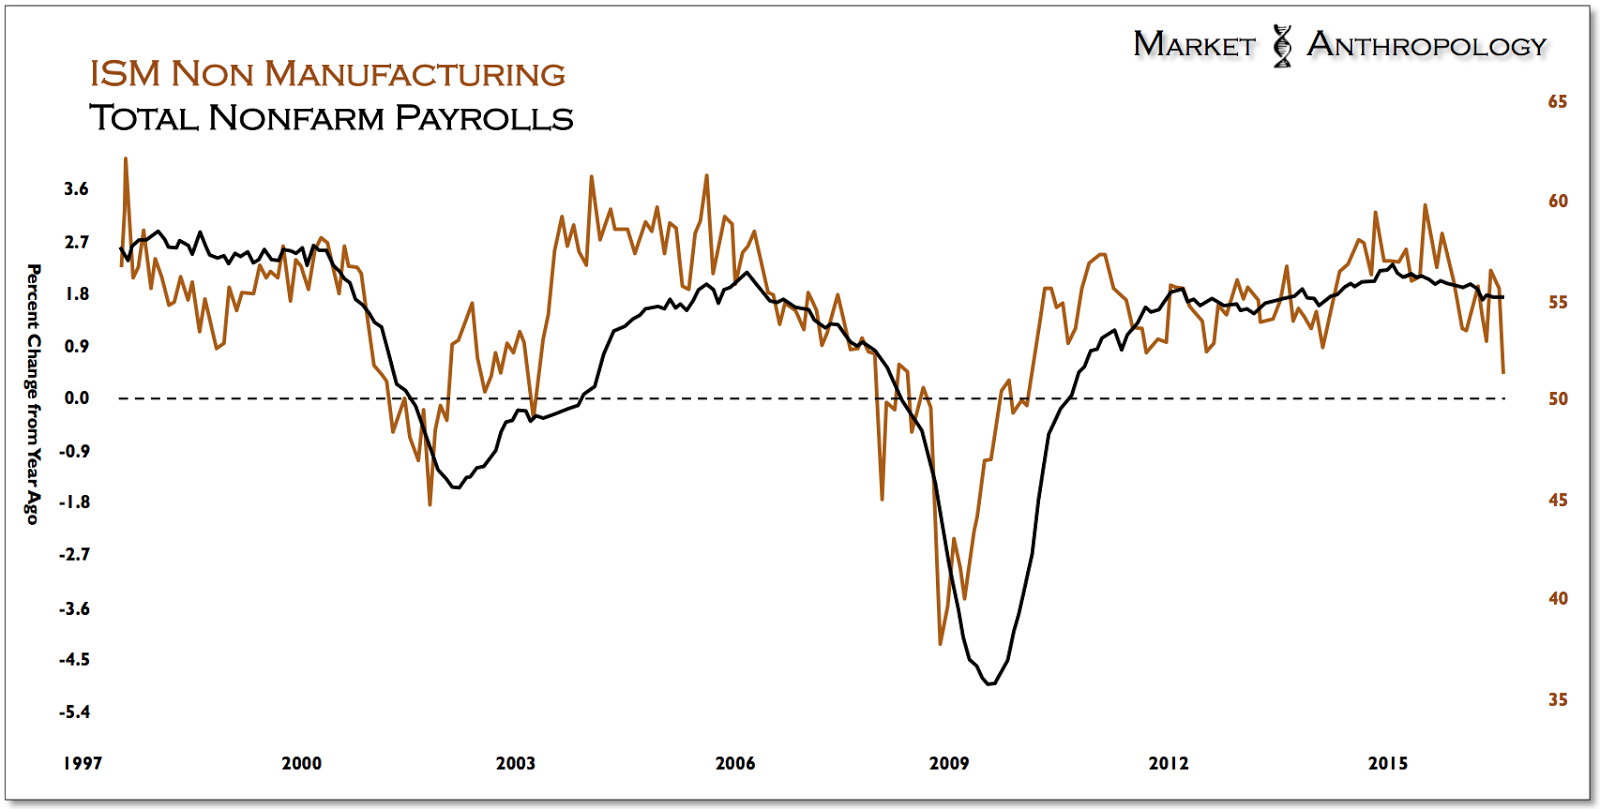 ISM Non Manufacturing and Nonfarm Payrolls Chart